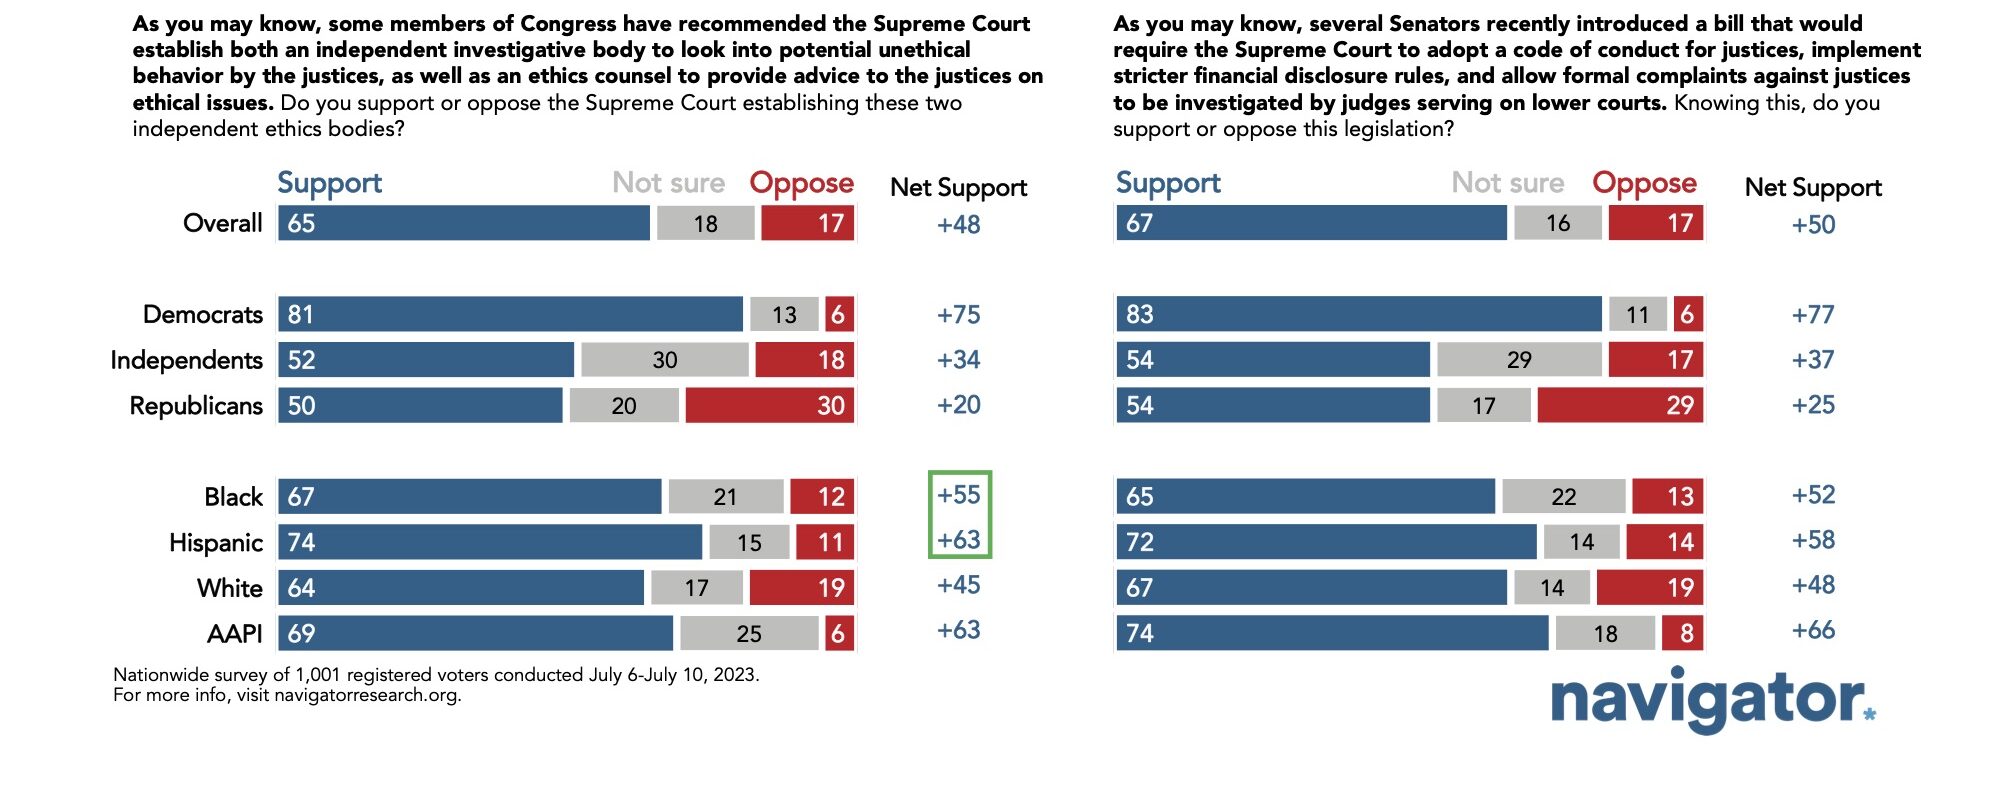 Survey results to the following prompt: 1. As you may know, some members of Congress have recommended the Supreme Court establish both an independent investigative body to look into potential unethical behavior by the justices, as well as an ethics counsel to provide advice to the justices on ethical issues. Do you support or oppose the Supreme Court establishing these two independent ethics bodies? 2. As you may know, several Senators recently introduced a bill that would require the Supreme Court to adopt a code of conduct for justices, implement stricter financial disclosure rules, and allow formal complaints against justices to be investigated by judges serving on lower courts. Knowing this, do you support or oppose this legislation?